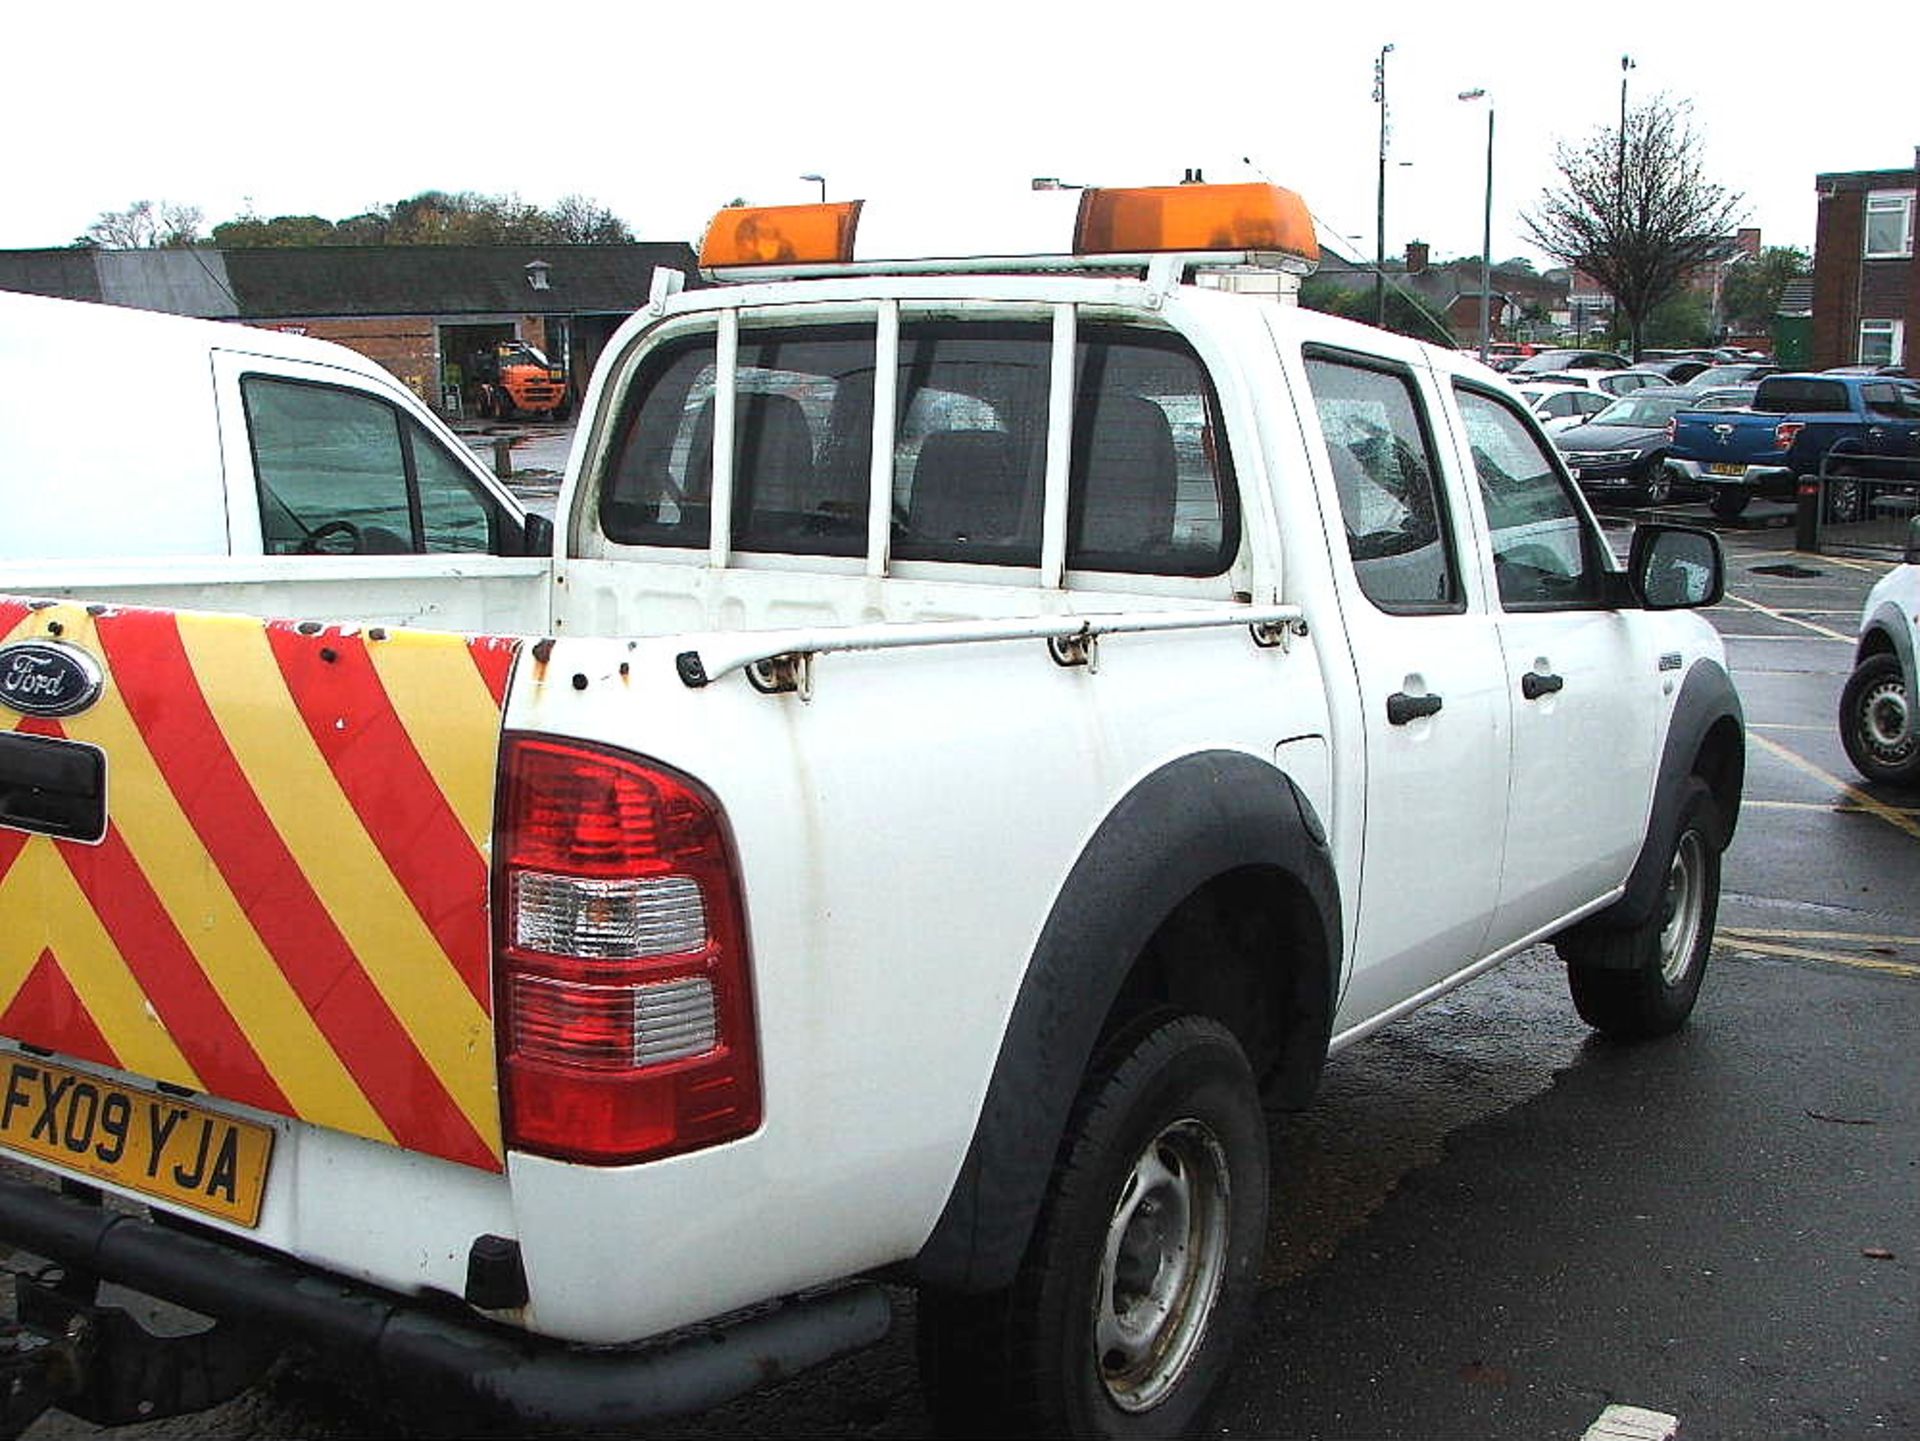 WHITE FORD RANGER TDCI OPEN BACK 4 X 4 TWIN CAB PICK UP TRUCK WITH TOW BALL & ROOF LIGHT 09 PLATE - Image 2 of 4